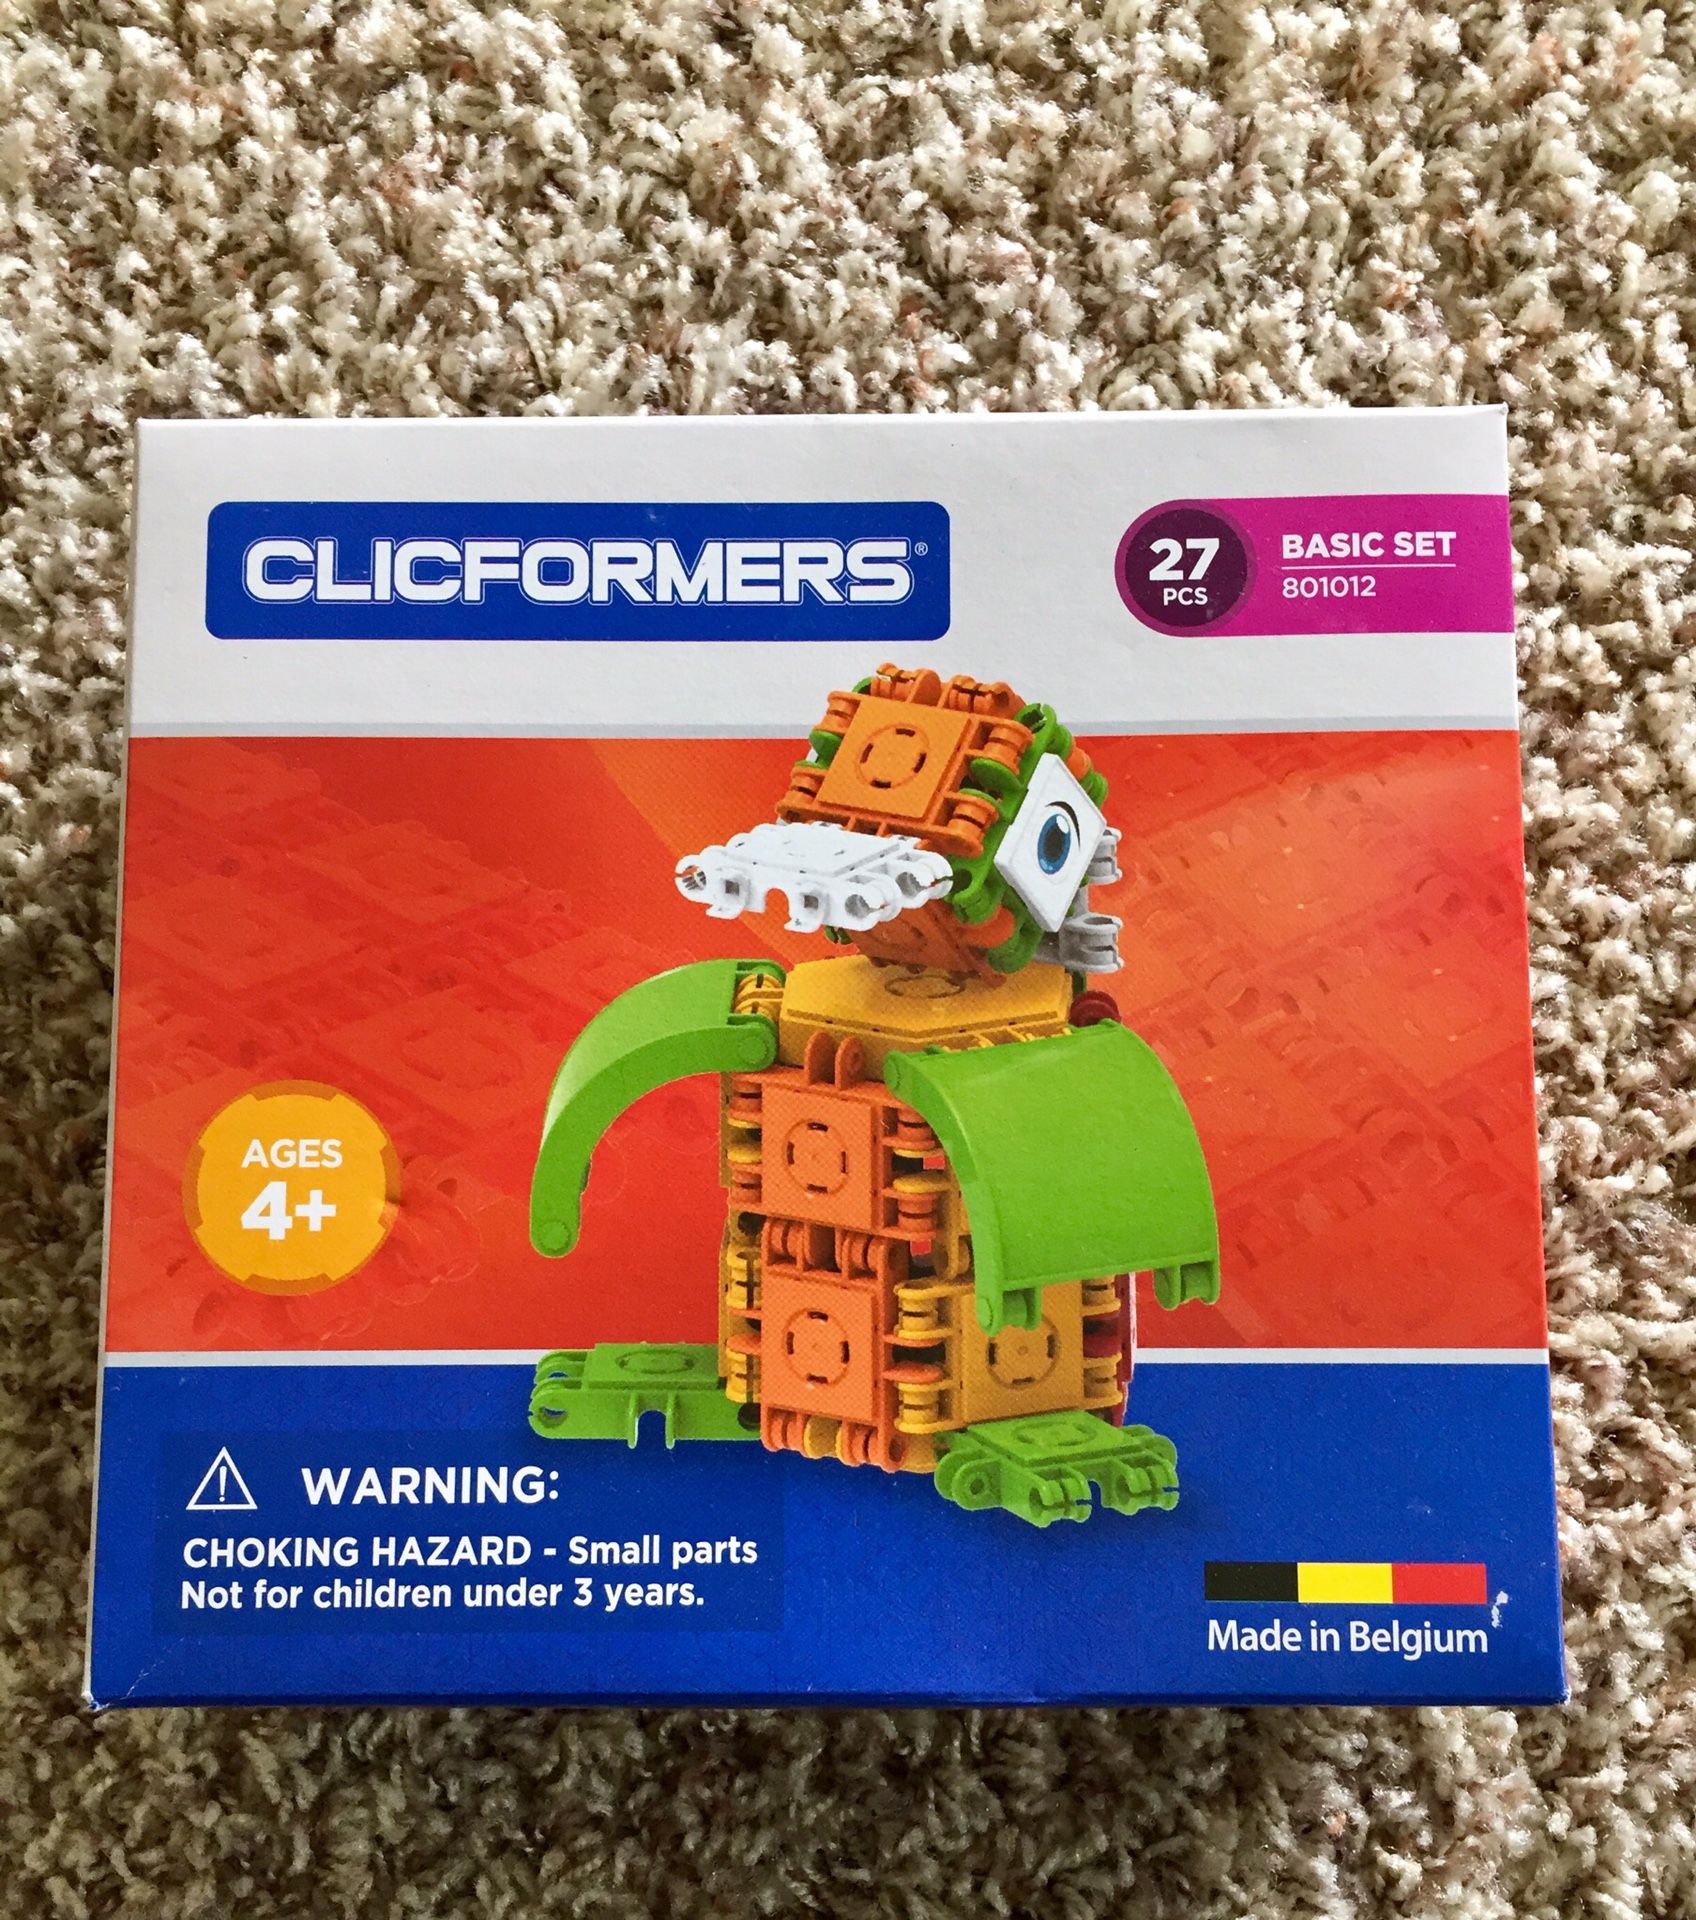 Clicformers toy. New sealed in original package